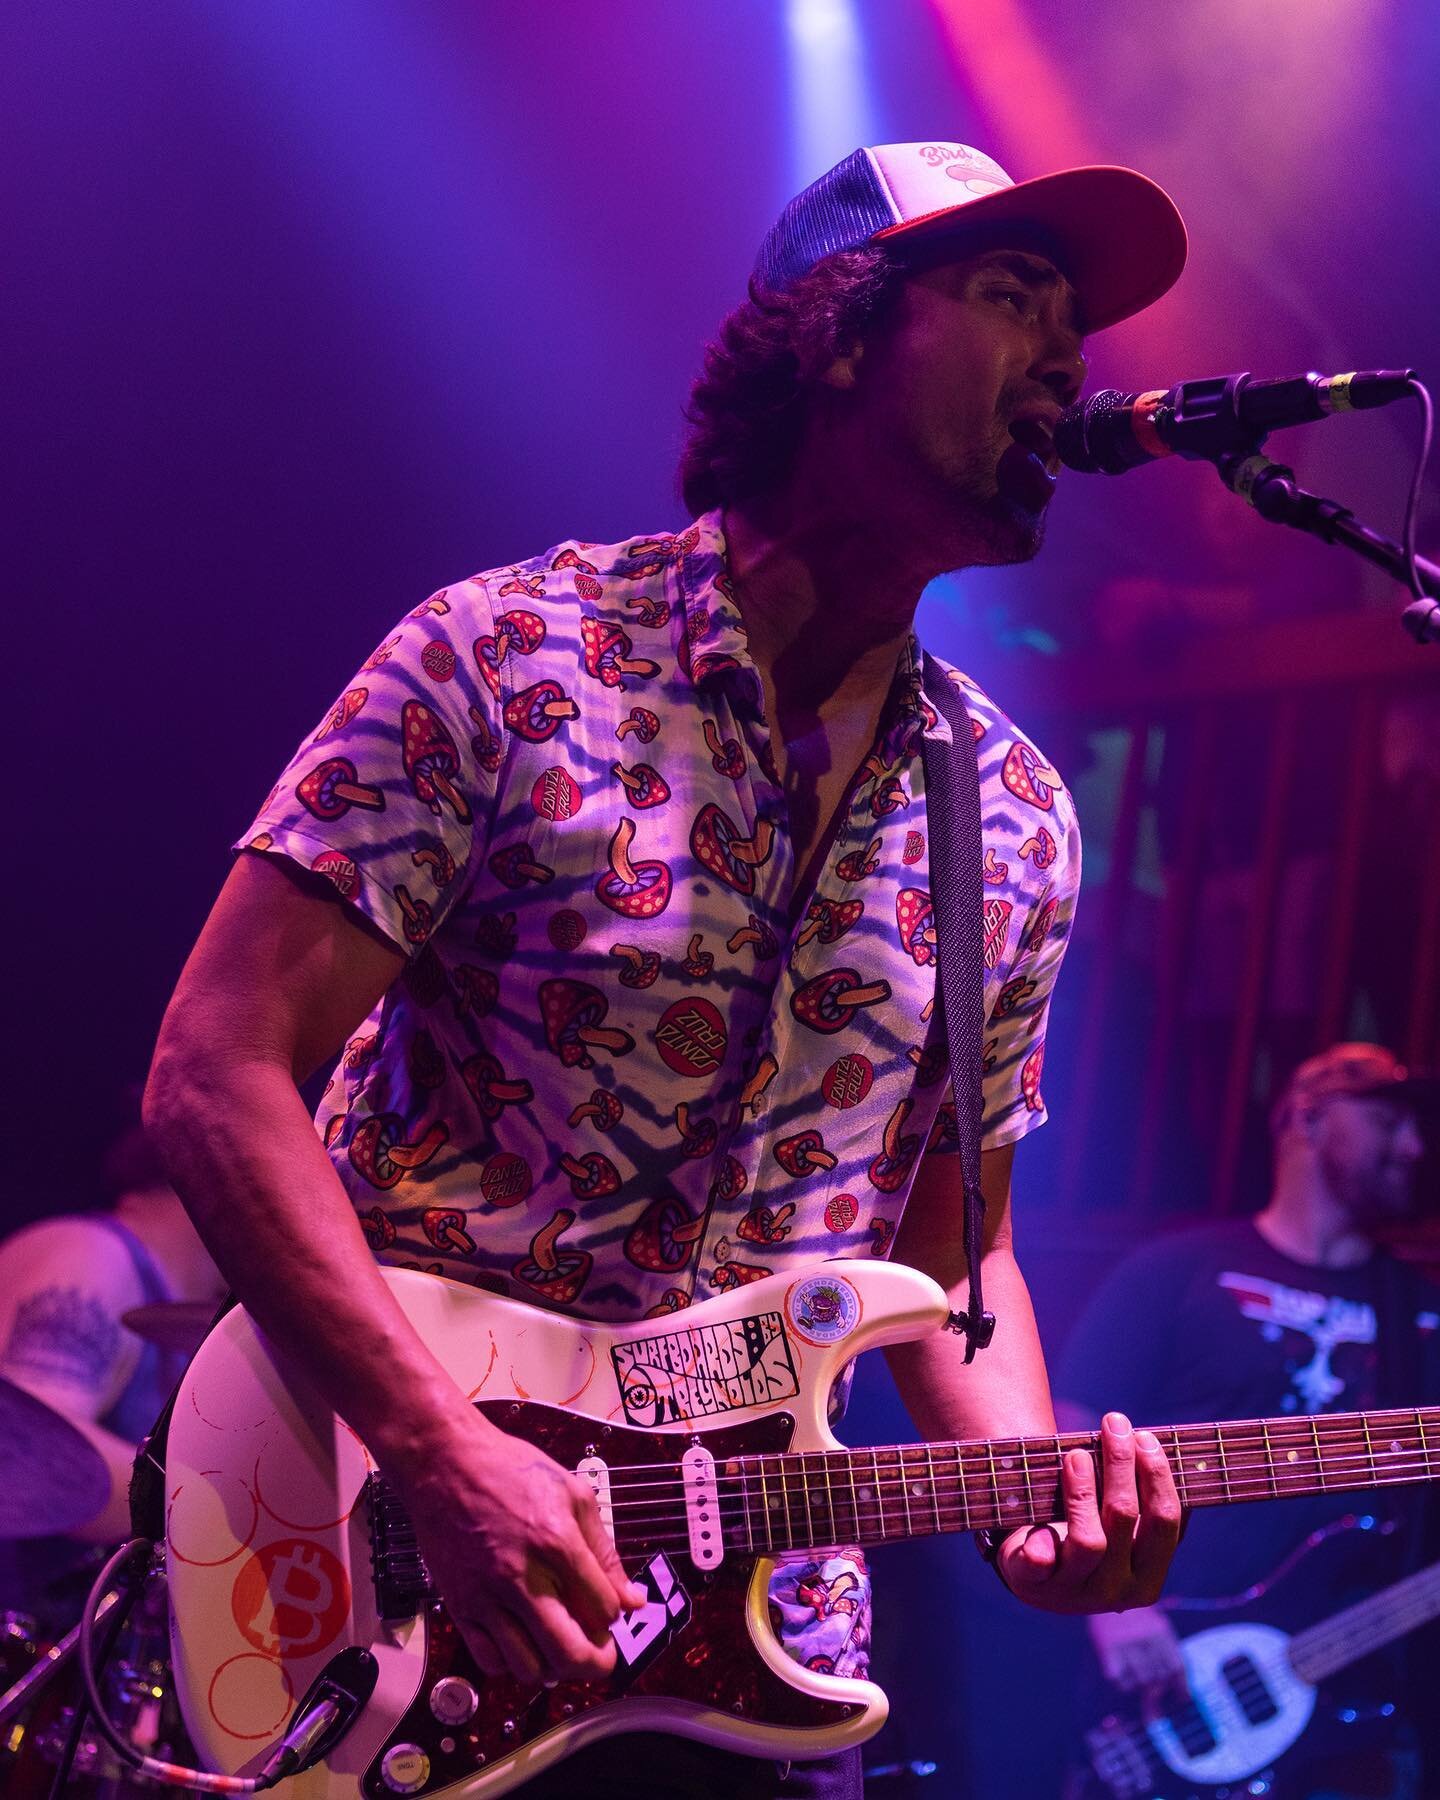 @theexpendables, 7/4/23, @birdandbettyslbi, Beach Haven, NJ 

By @gludwig311

SEE MORE PHOTOS AT https://www.jerseyindie.com/blog/the-expendables-7/4/23-bird-and-bettys-beach-haven-nj-photos

#TheExpendablesBand #BirdandBettys #BeachHaven #OceanCount